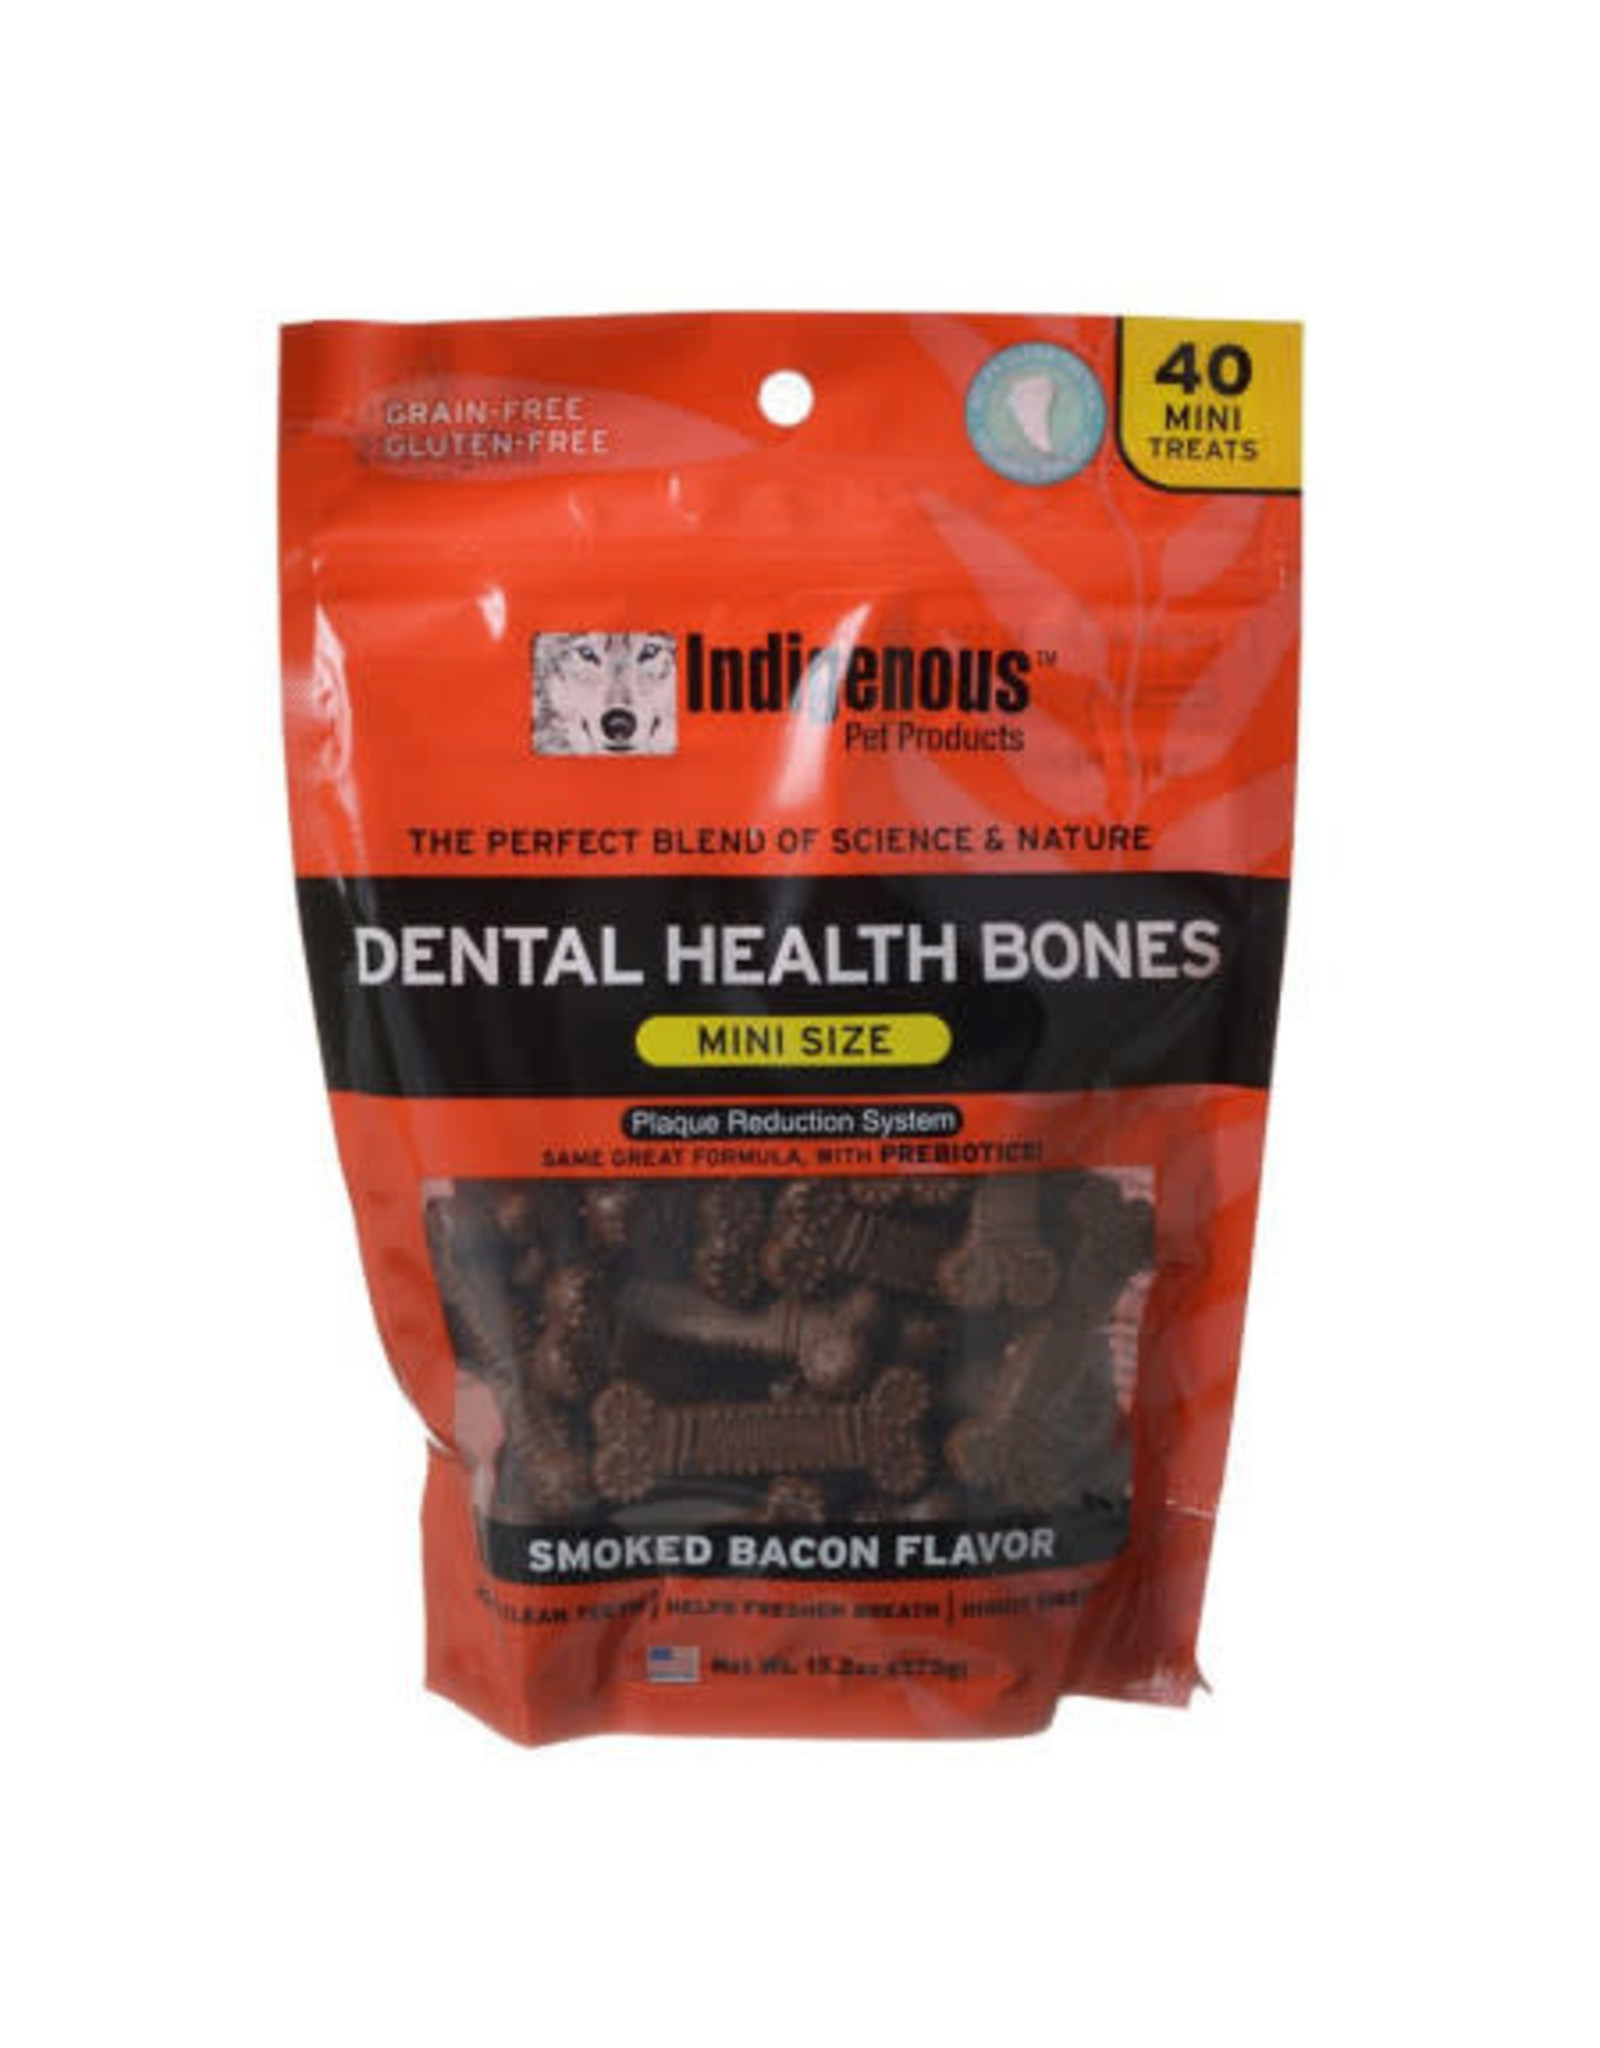 Indigenous Pet Products INDIGENOUS DENTAL HEALTH BONES MINI SIZE SMOKED BACON FLAVOR 40-COUNT